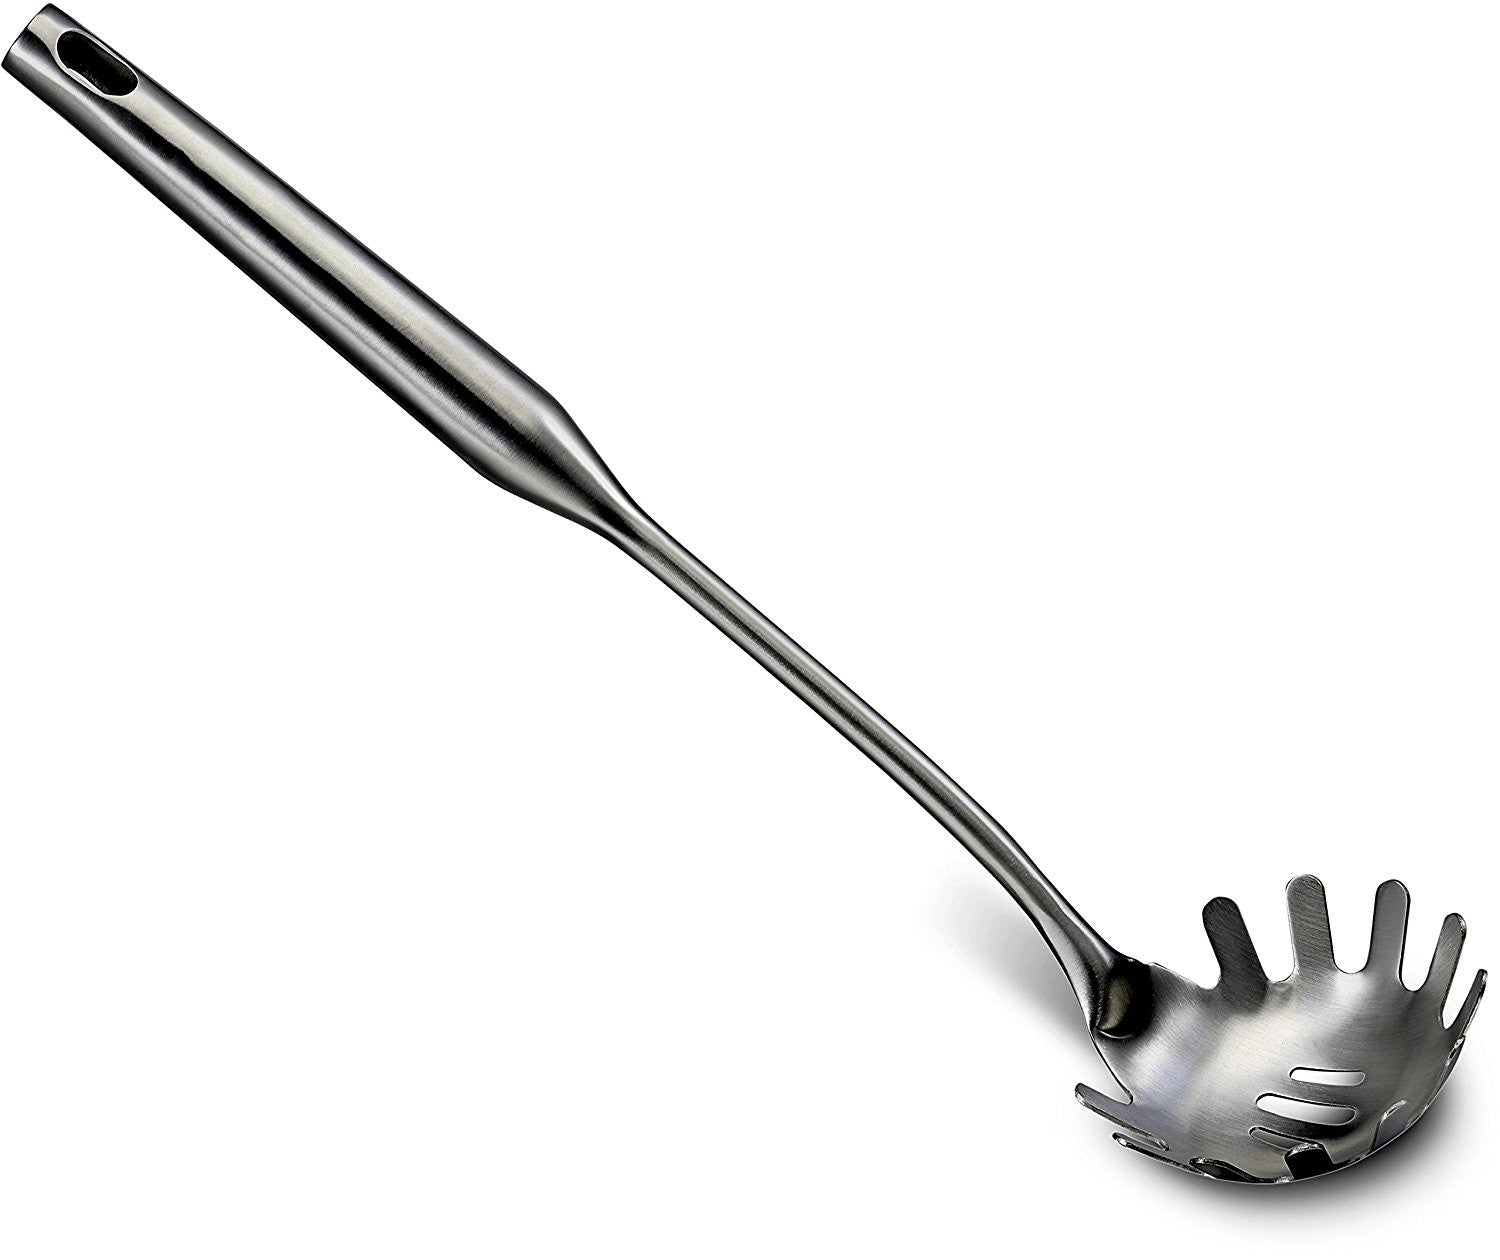 Shop a Pasta Serving Spoon to Assist in Everyday Food Preparation